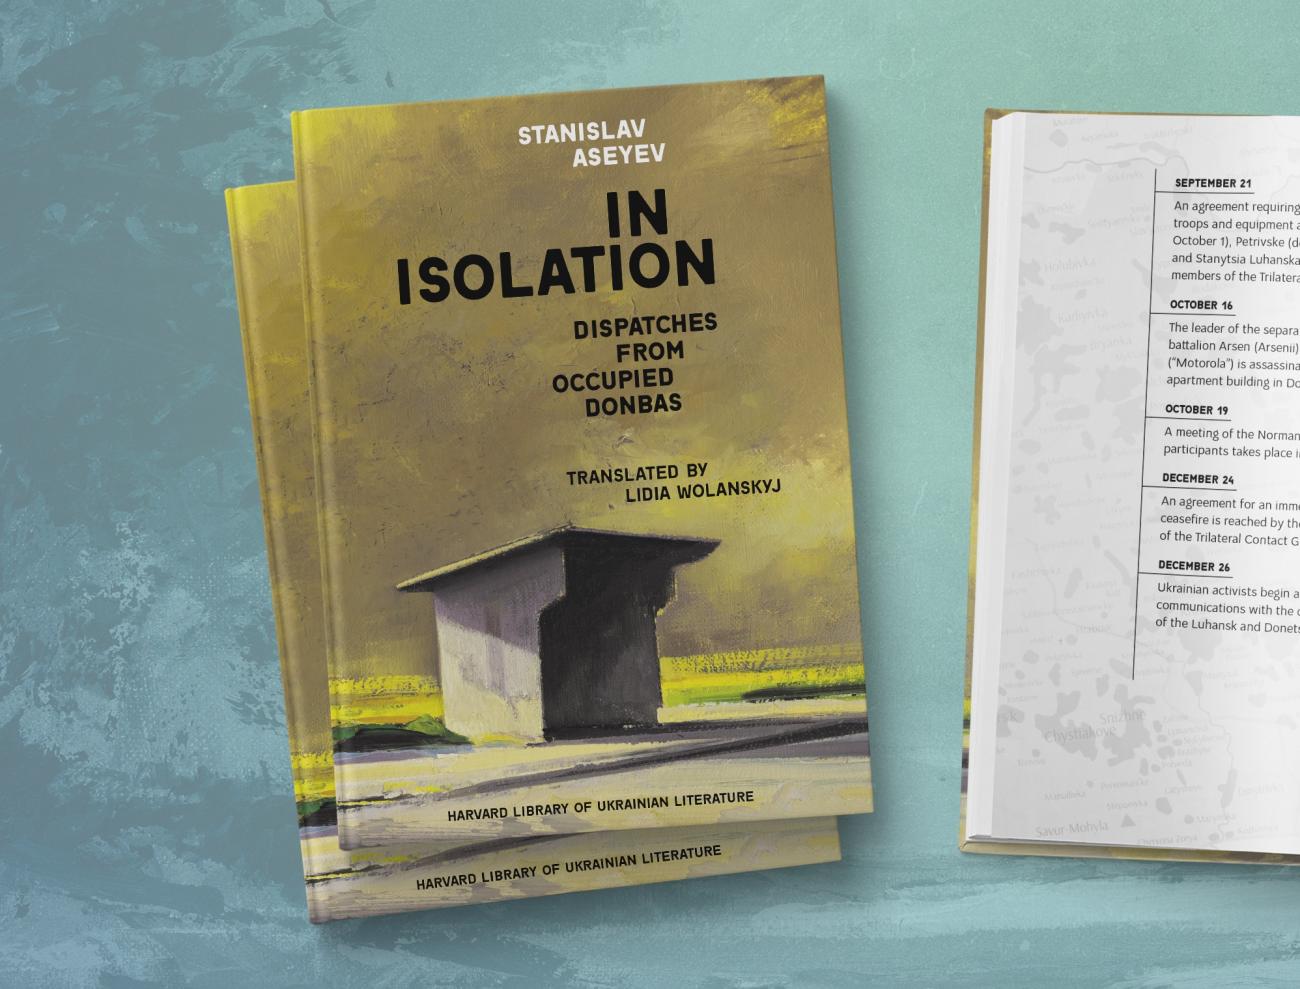 The cover of the book In Isolation: Dispatches from Occupied Donbas